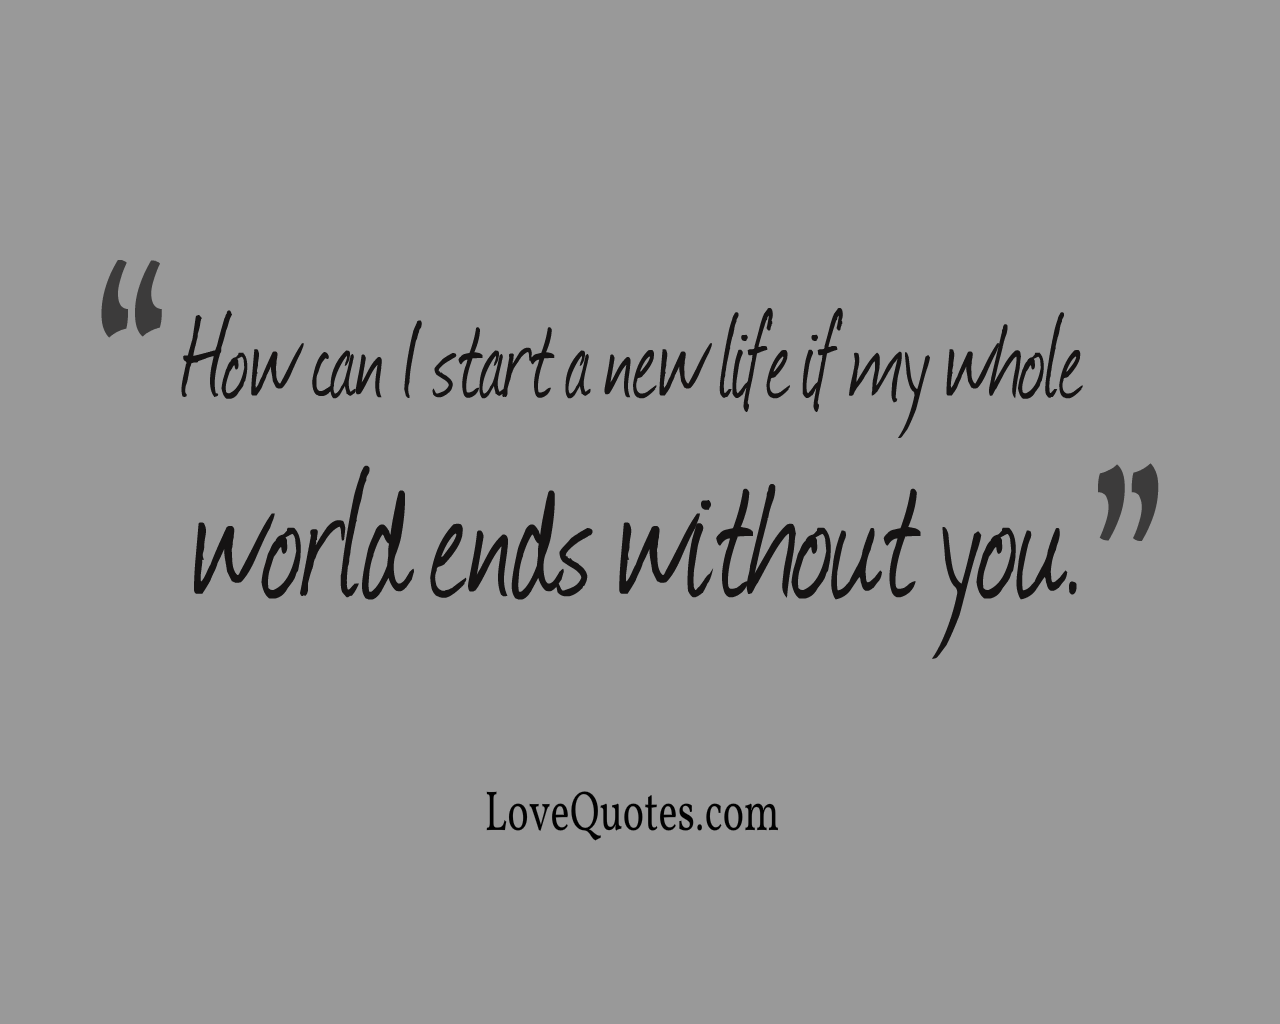 My World Ends Without You - Love Quotes